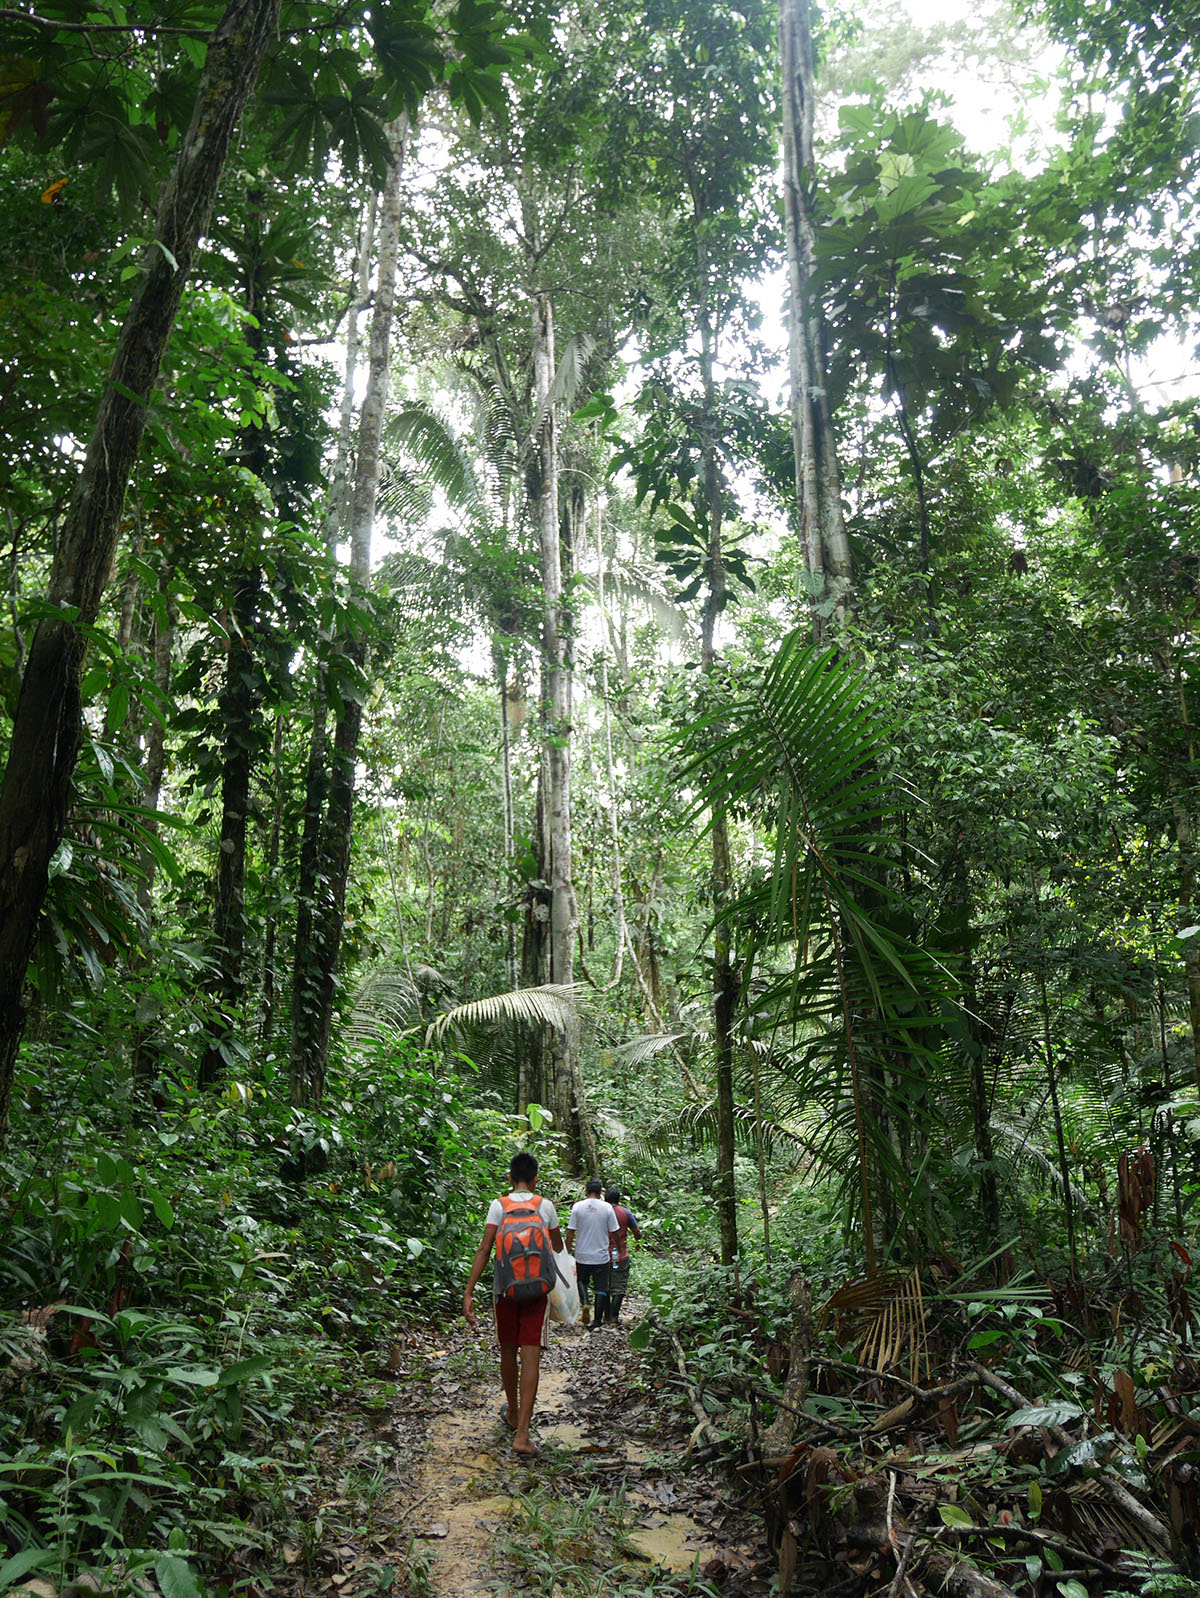 Forest path in the Community of Shawi San Jose, Peru, where indigenous peoples are leading efforts to define their land rights to better protect their forests and their way of life.